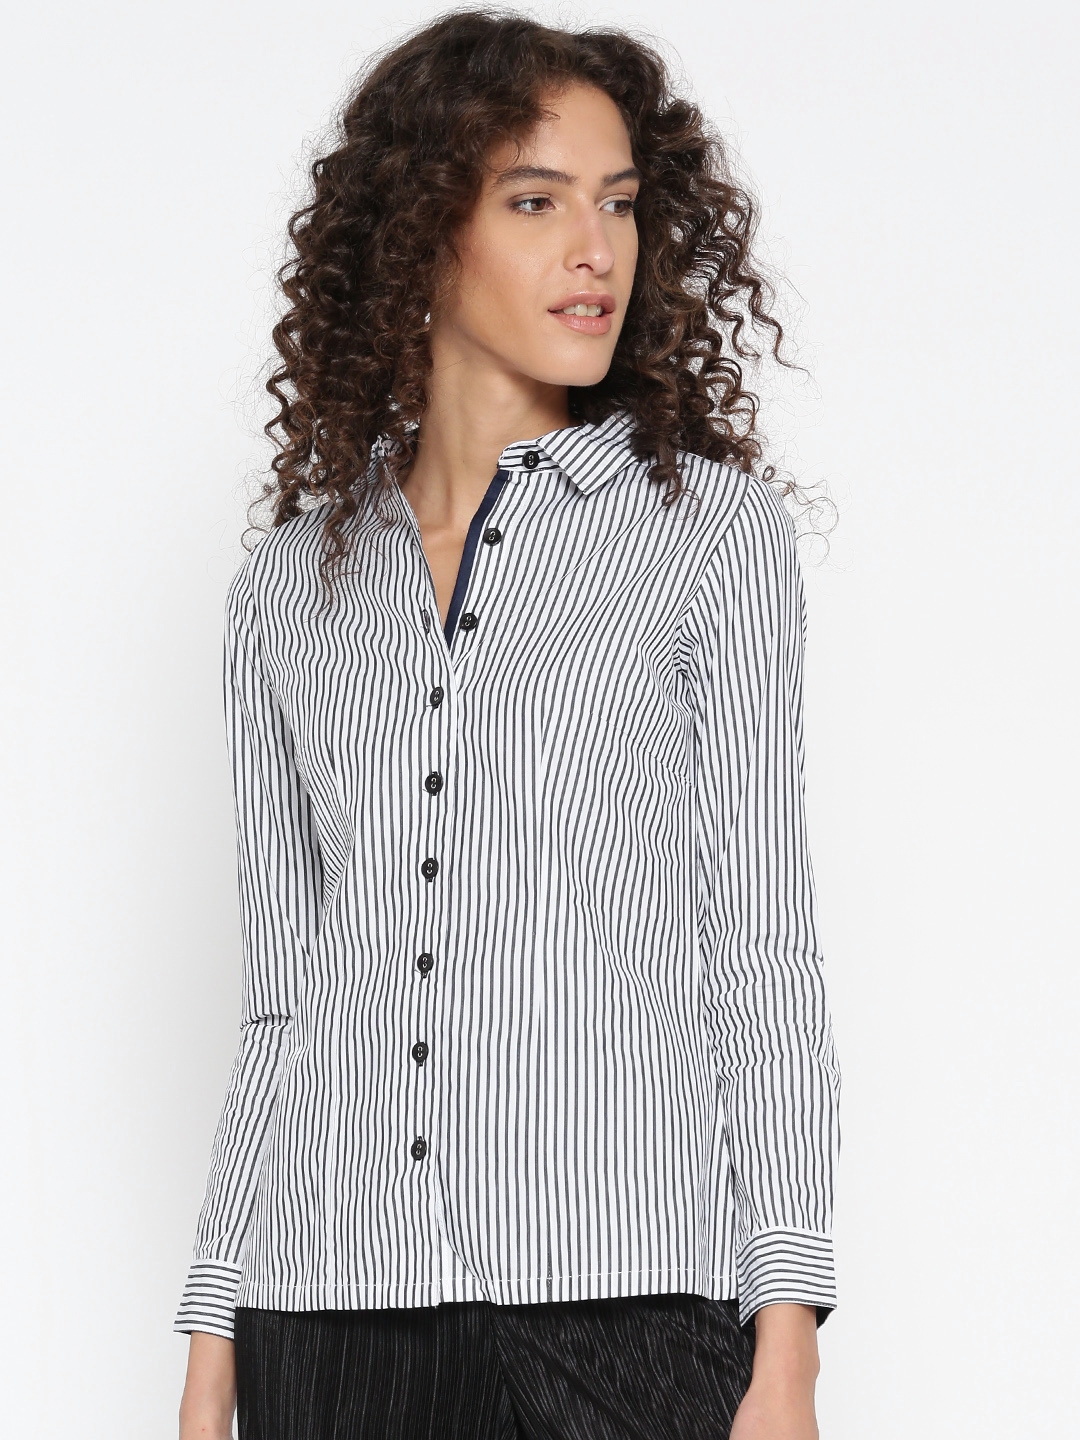 Buy AND Black & White Striped Shirt - Shirts for Women 1057387 | Myntra